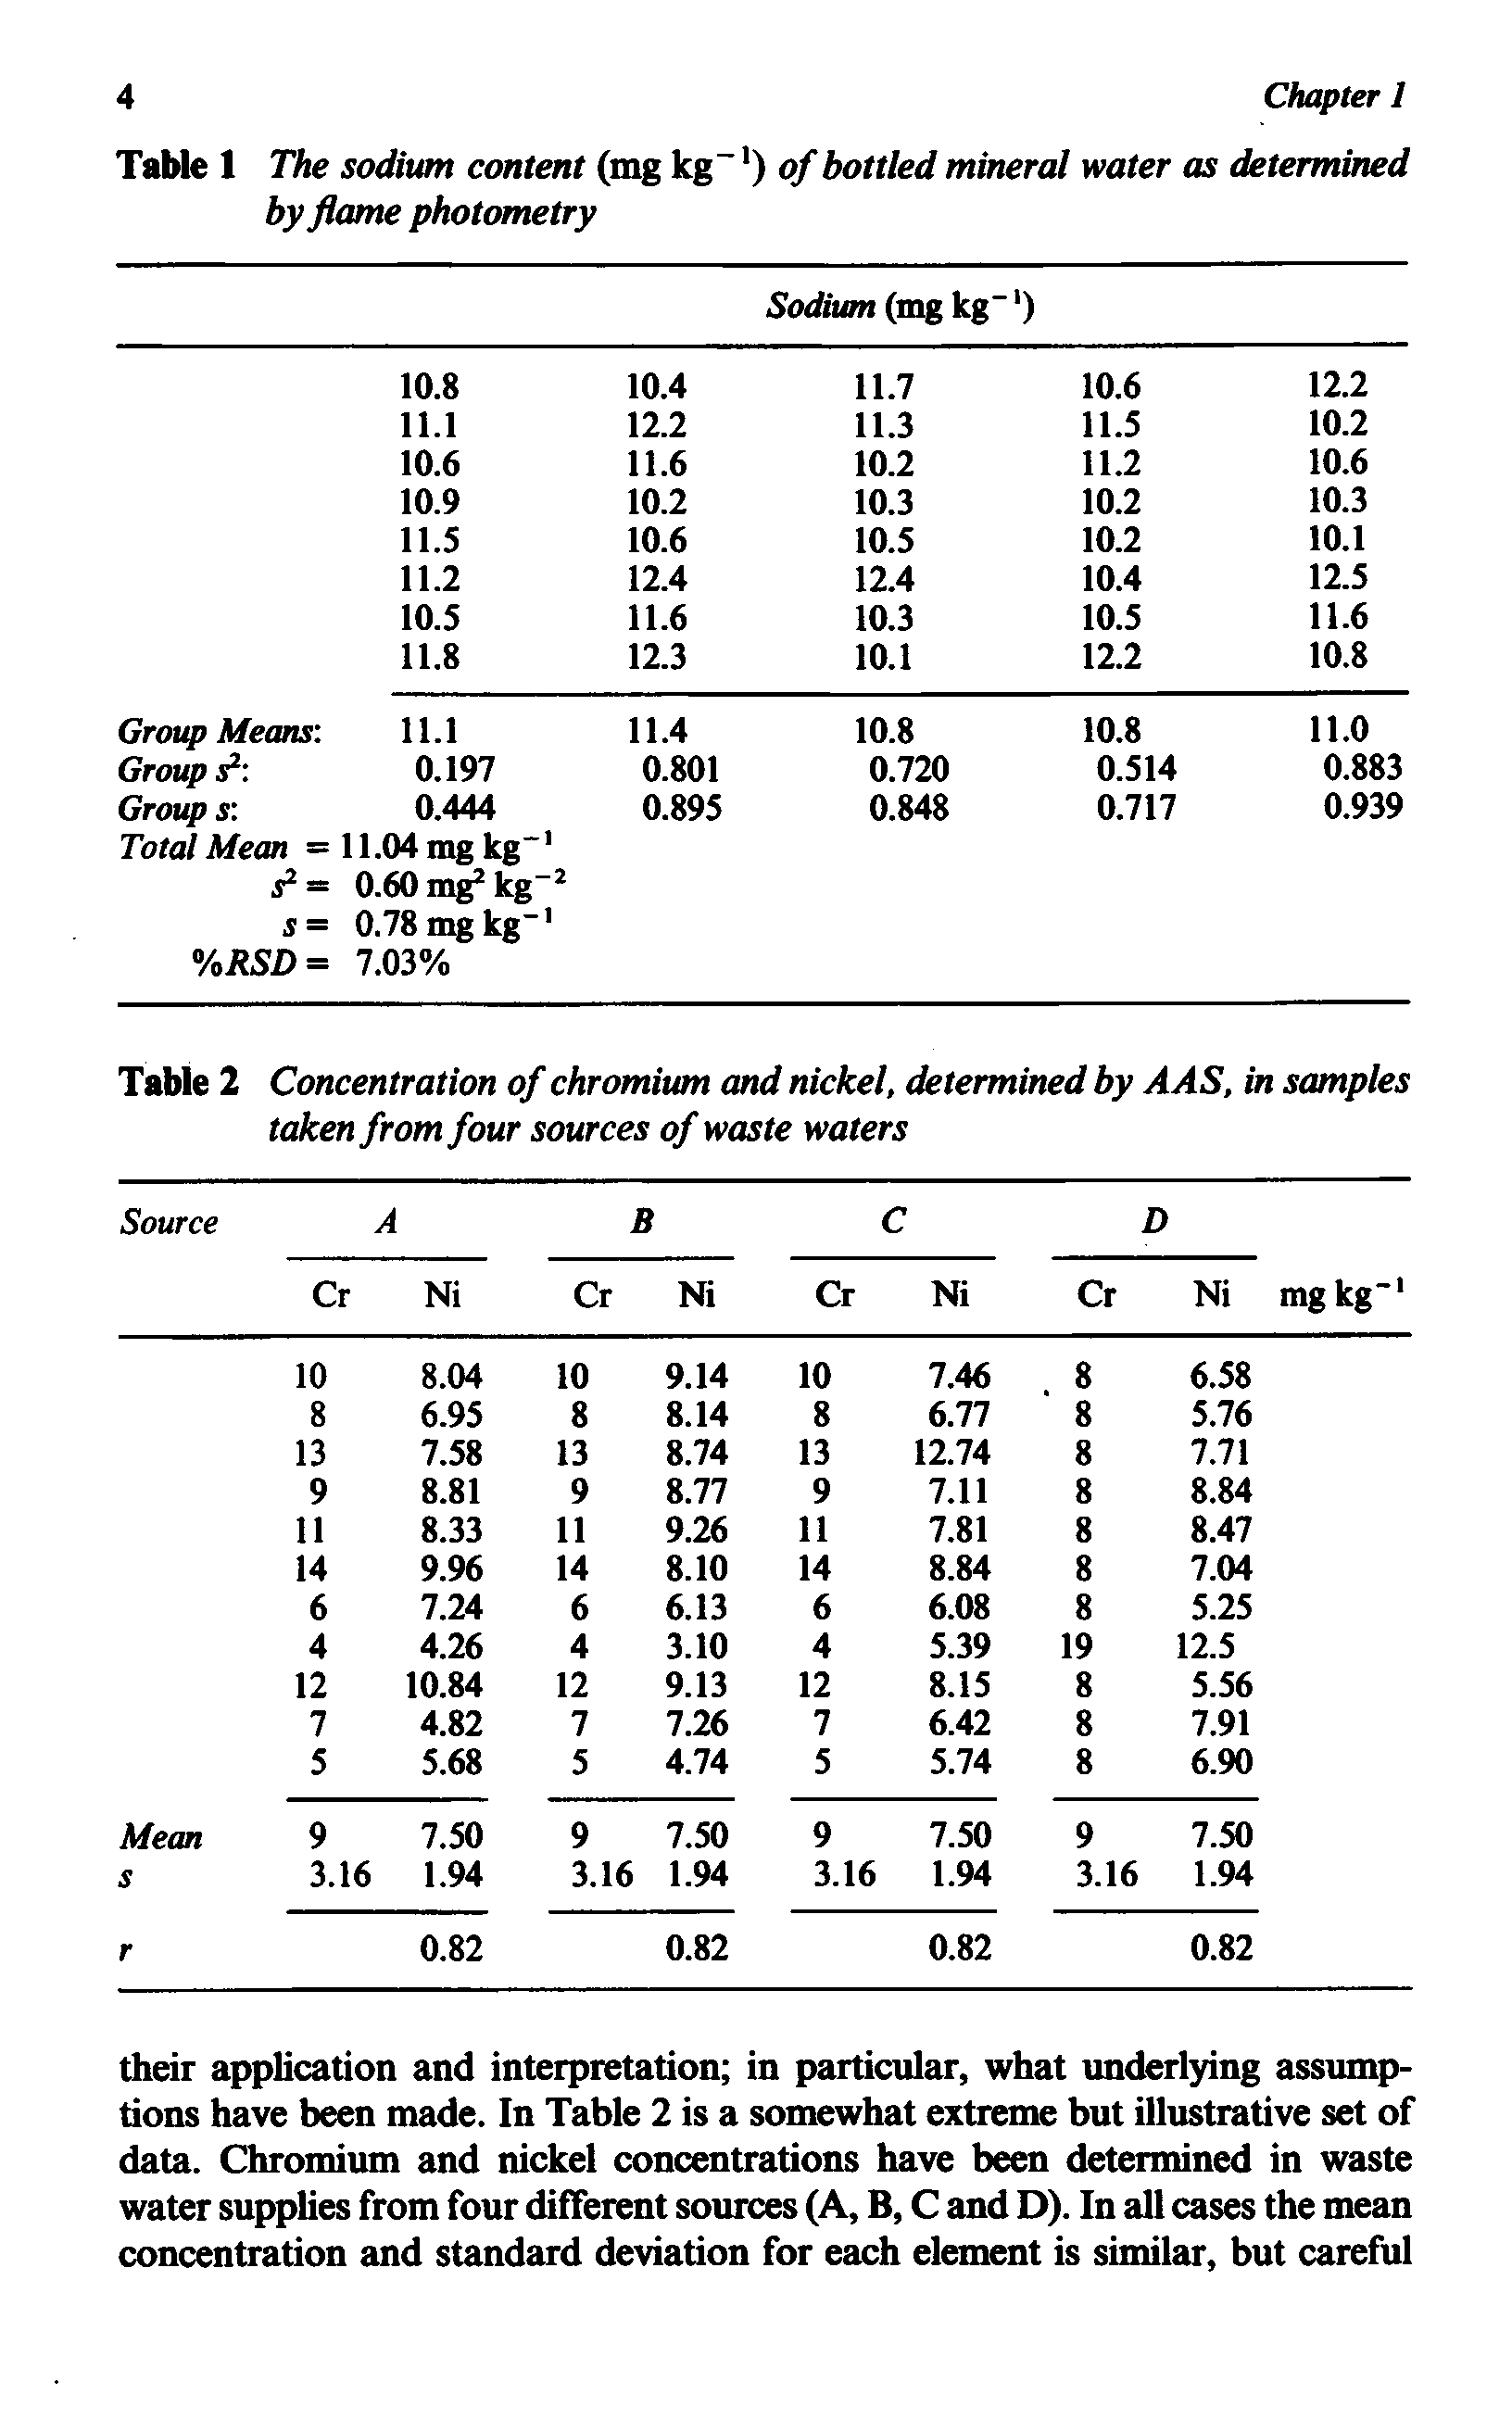 Table 2 Concentration of chromium and nickel, determined by AAS, in samples taken from four sources of waste waters...